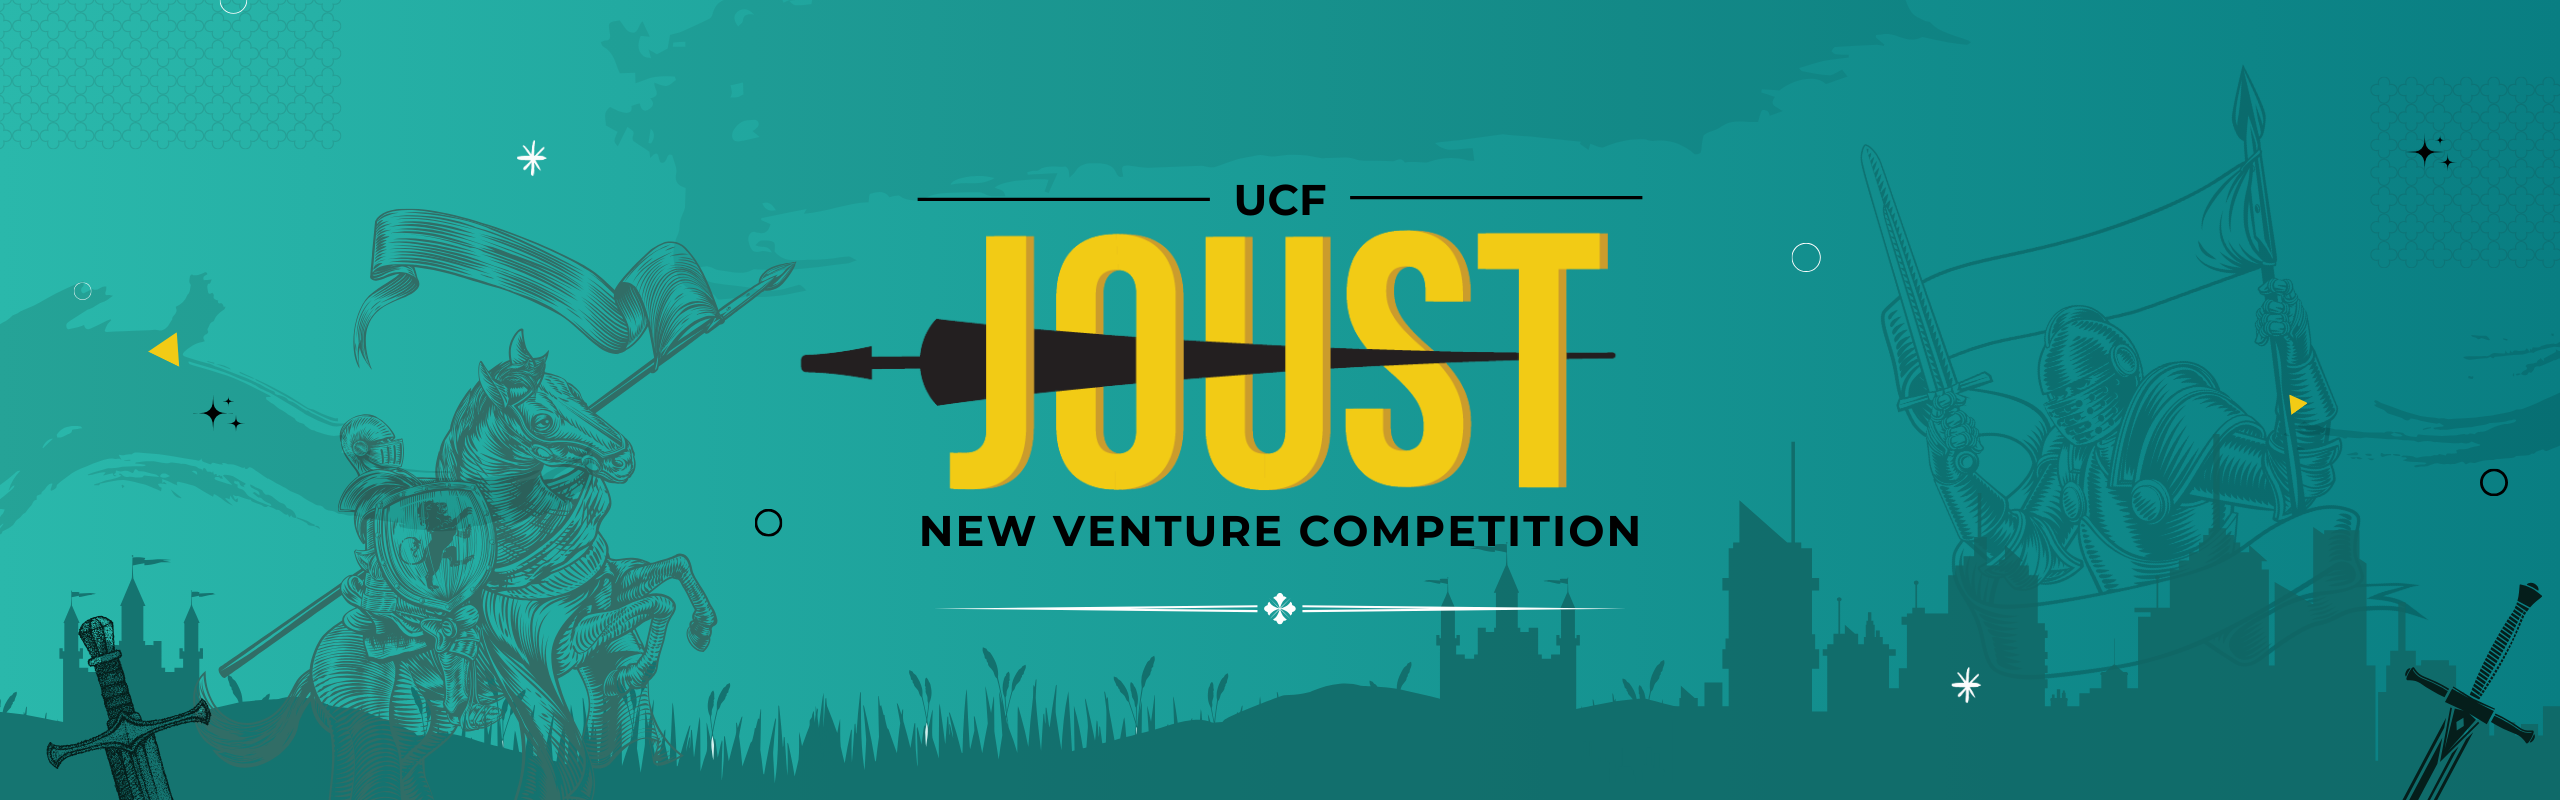 UCF Joust New Venture Competition